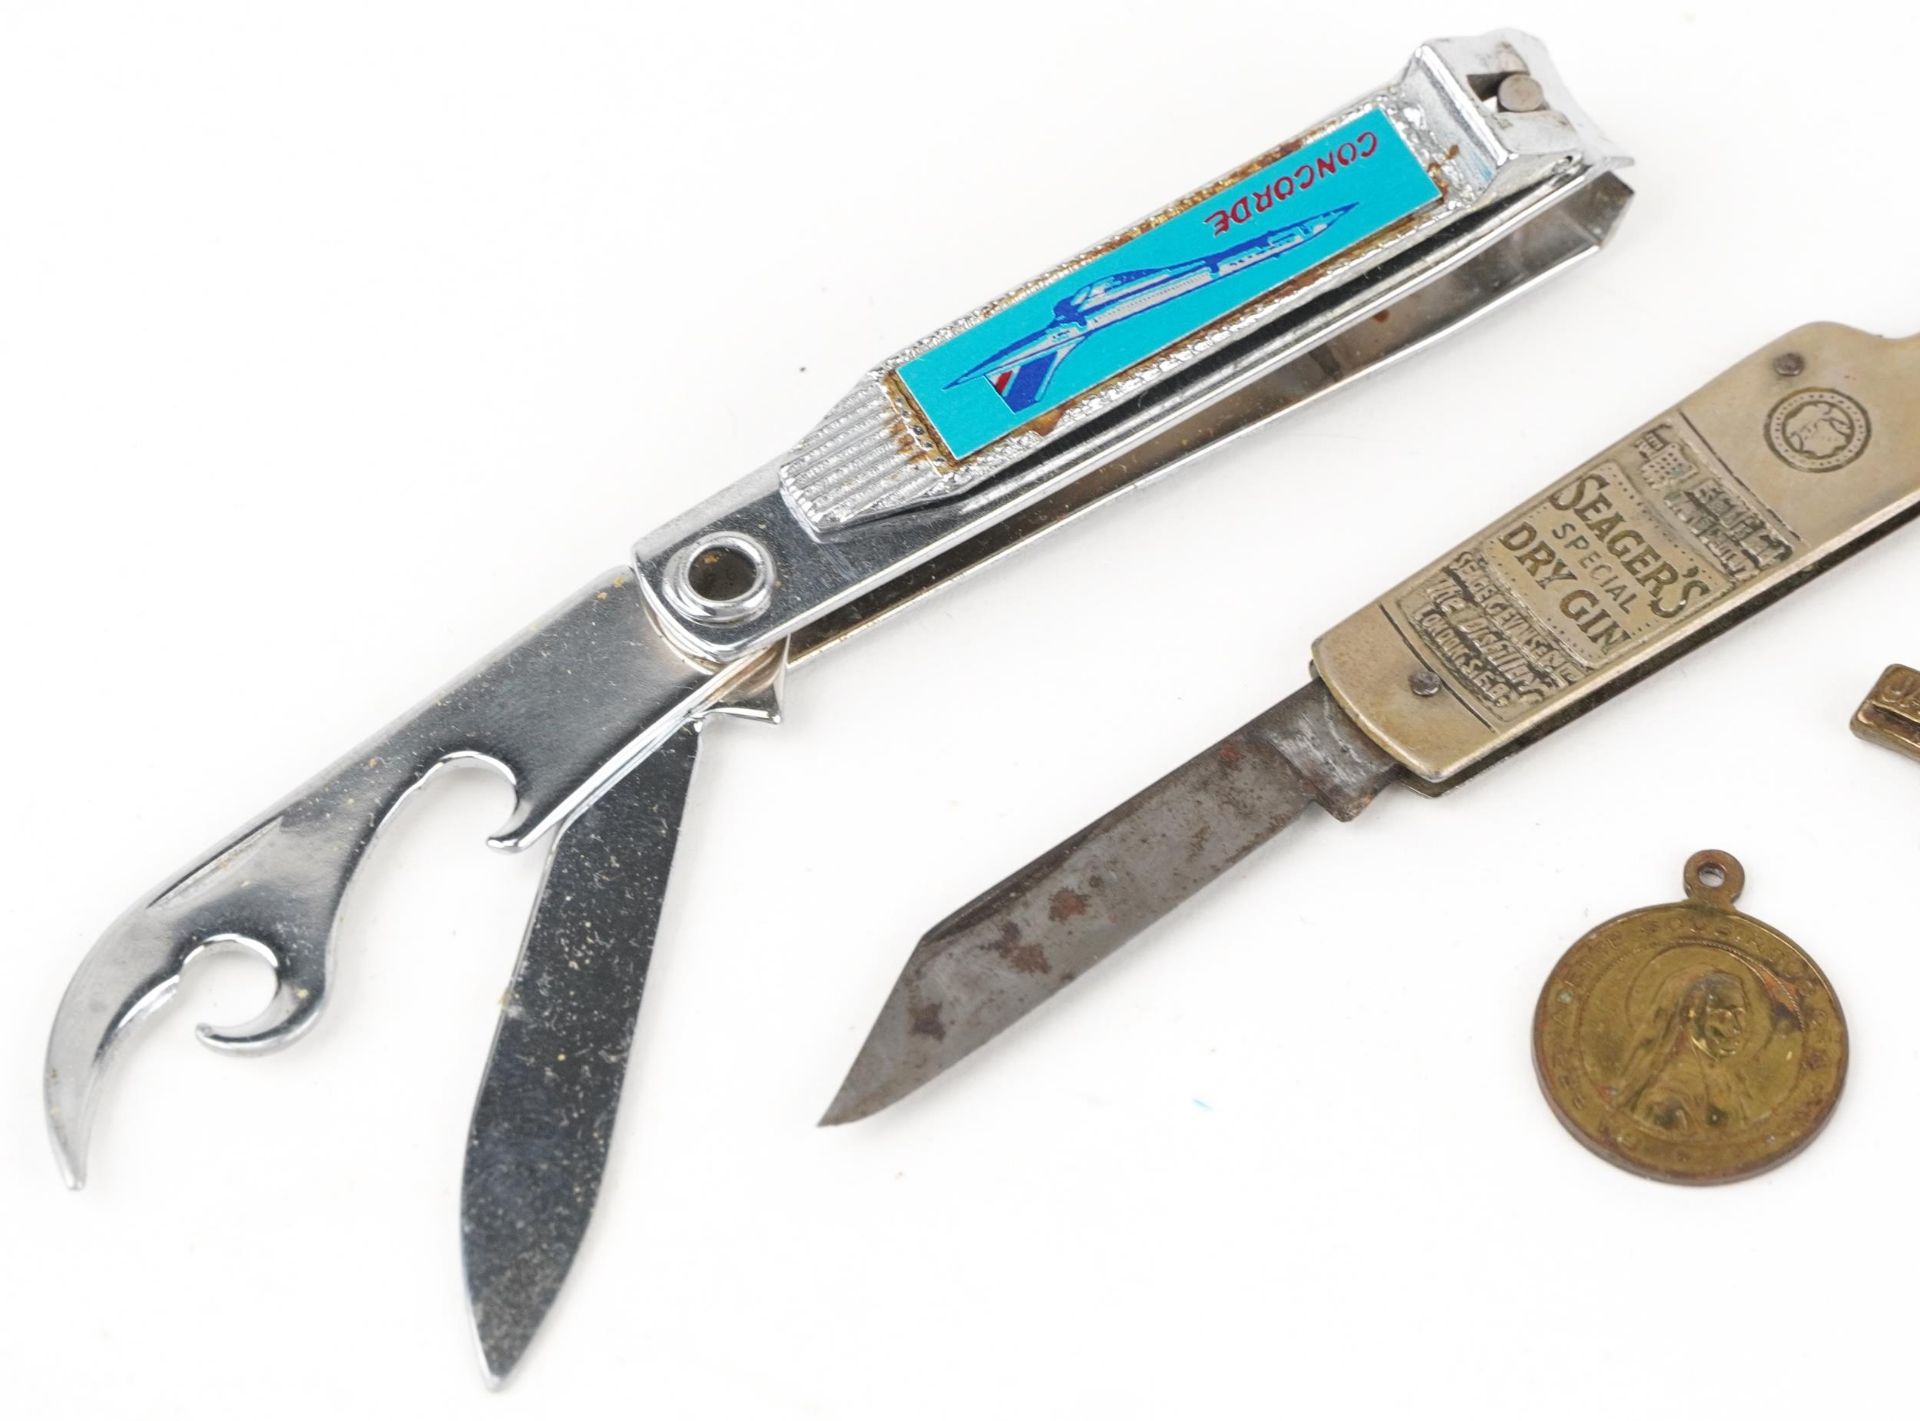 Sundry items including an aviation interest nail clippers advertising Concorde and a folding - Bild 2 aus 3